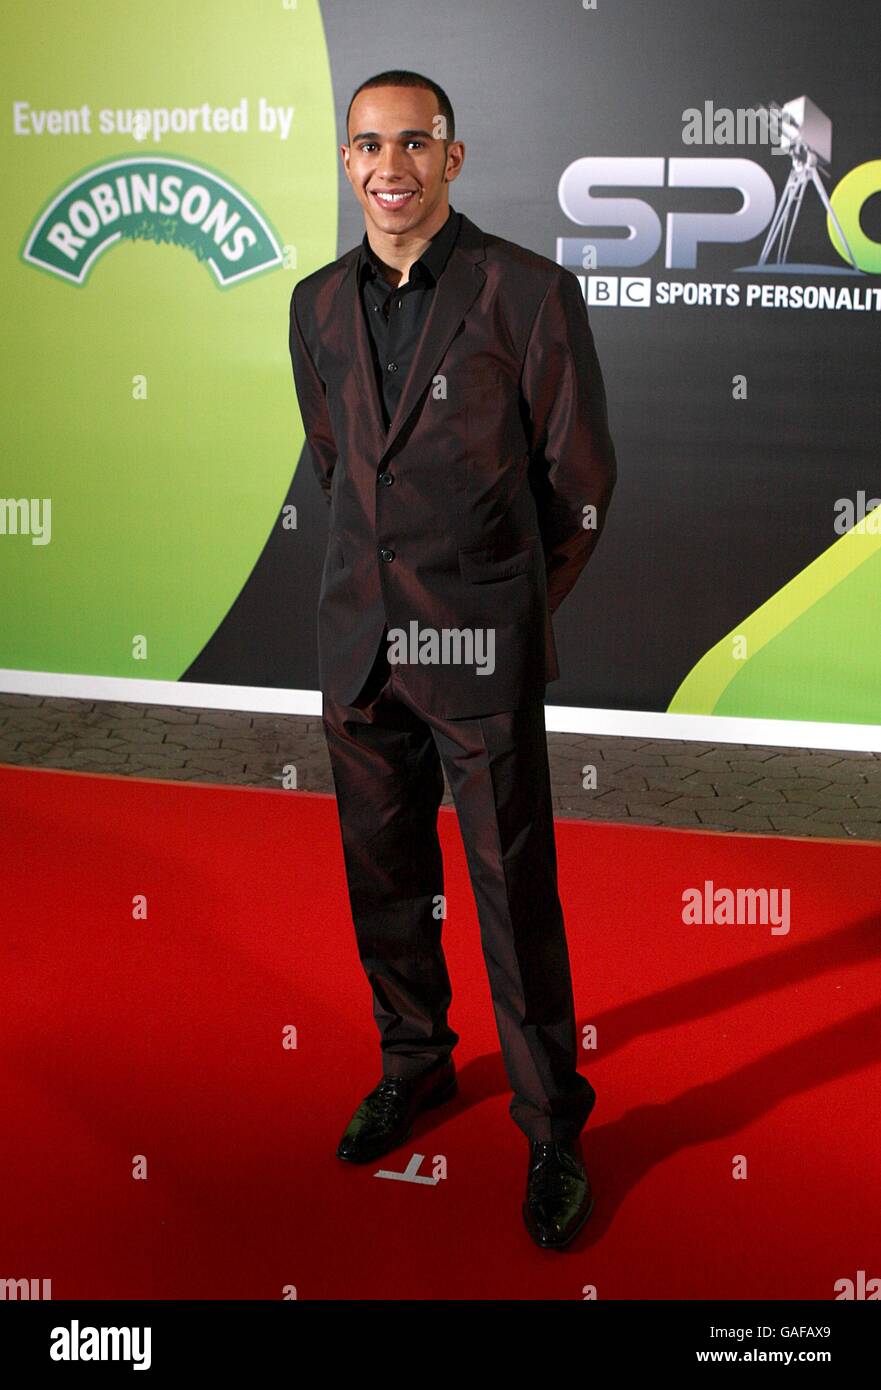 Lewis Hamilton arrives for BBC Sports Personality of the Year 2007 awards, at the NEC in Birmingham. Stock Photo